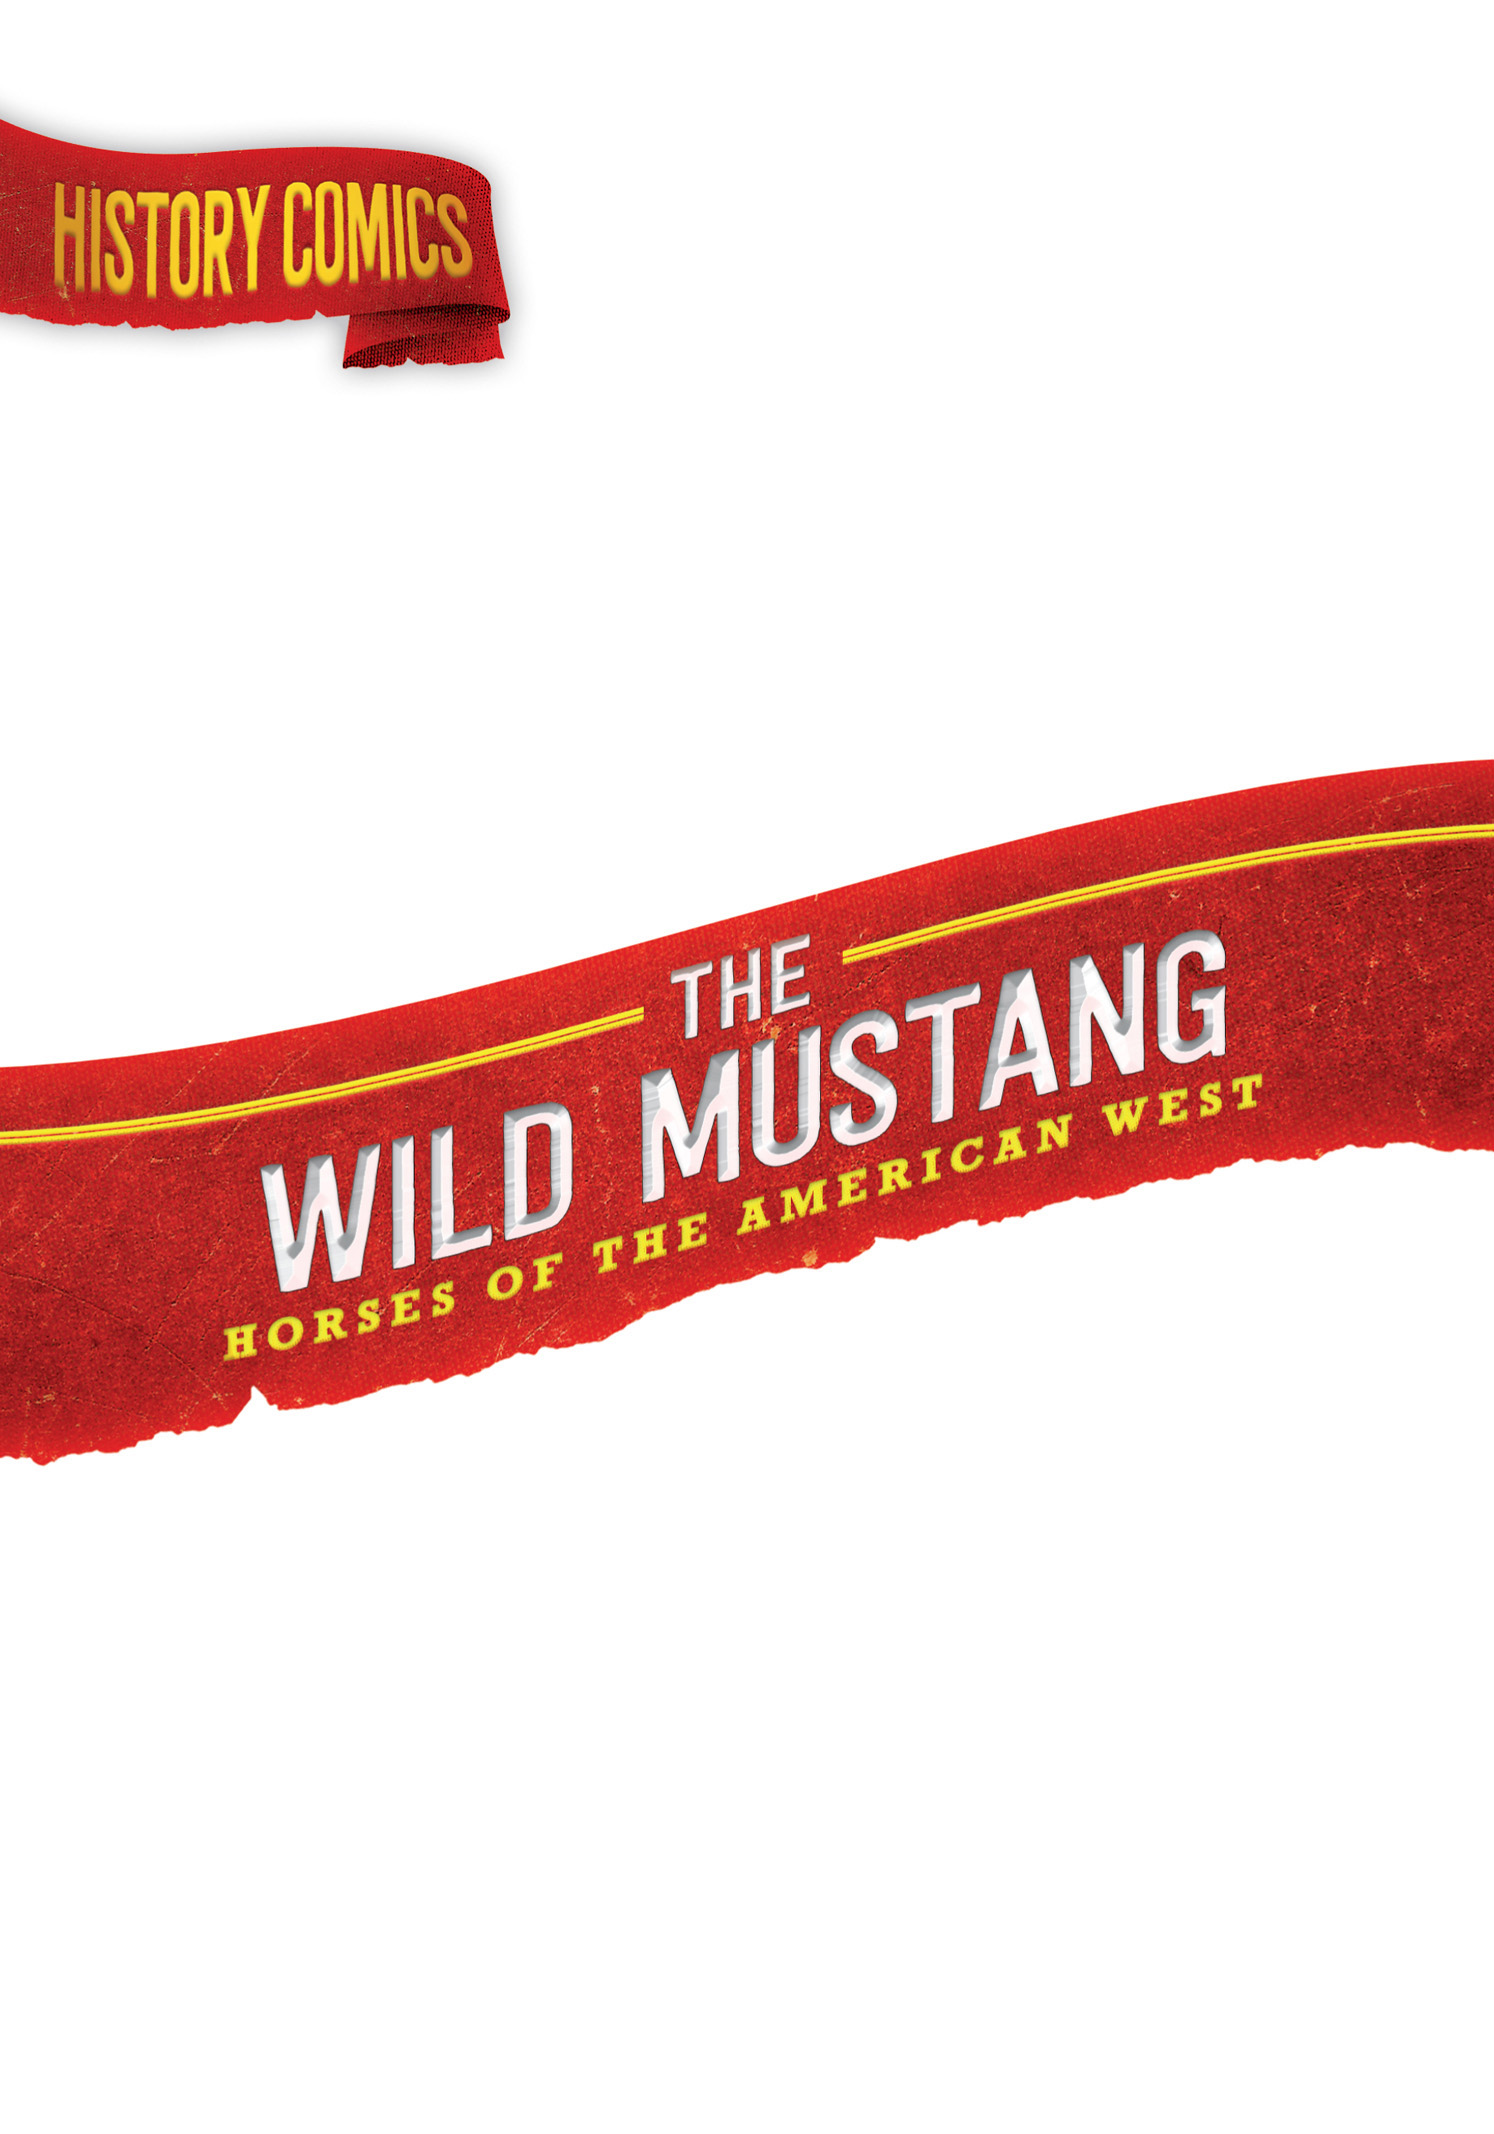 Read online History Comics comic -  Issue # The Wild Mustang - Horses of the American West - 2